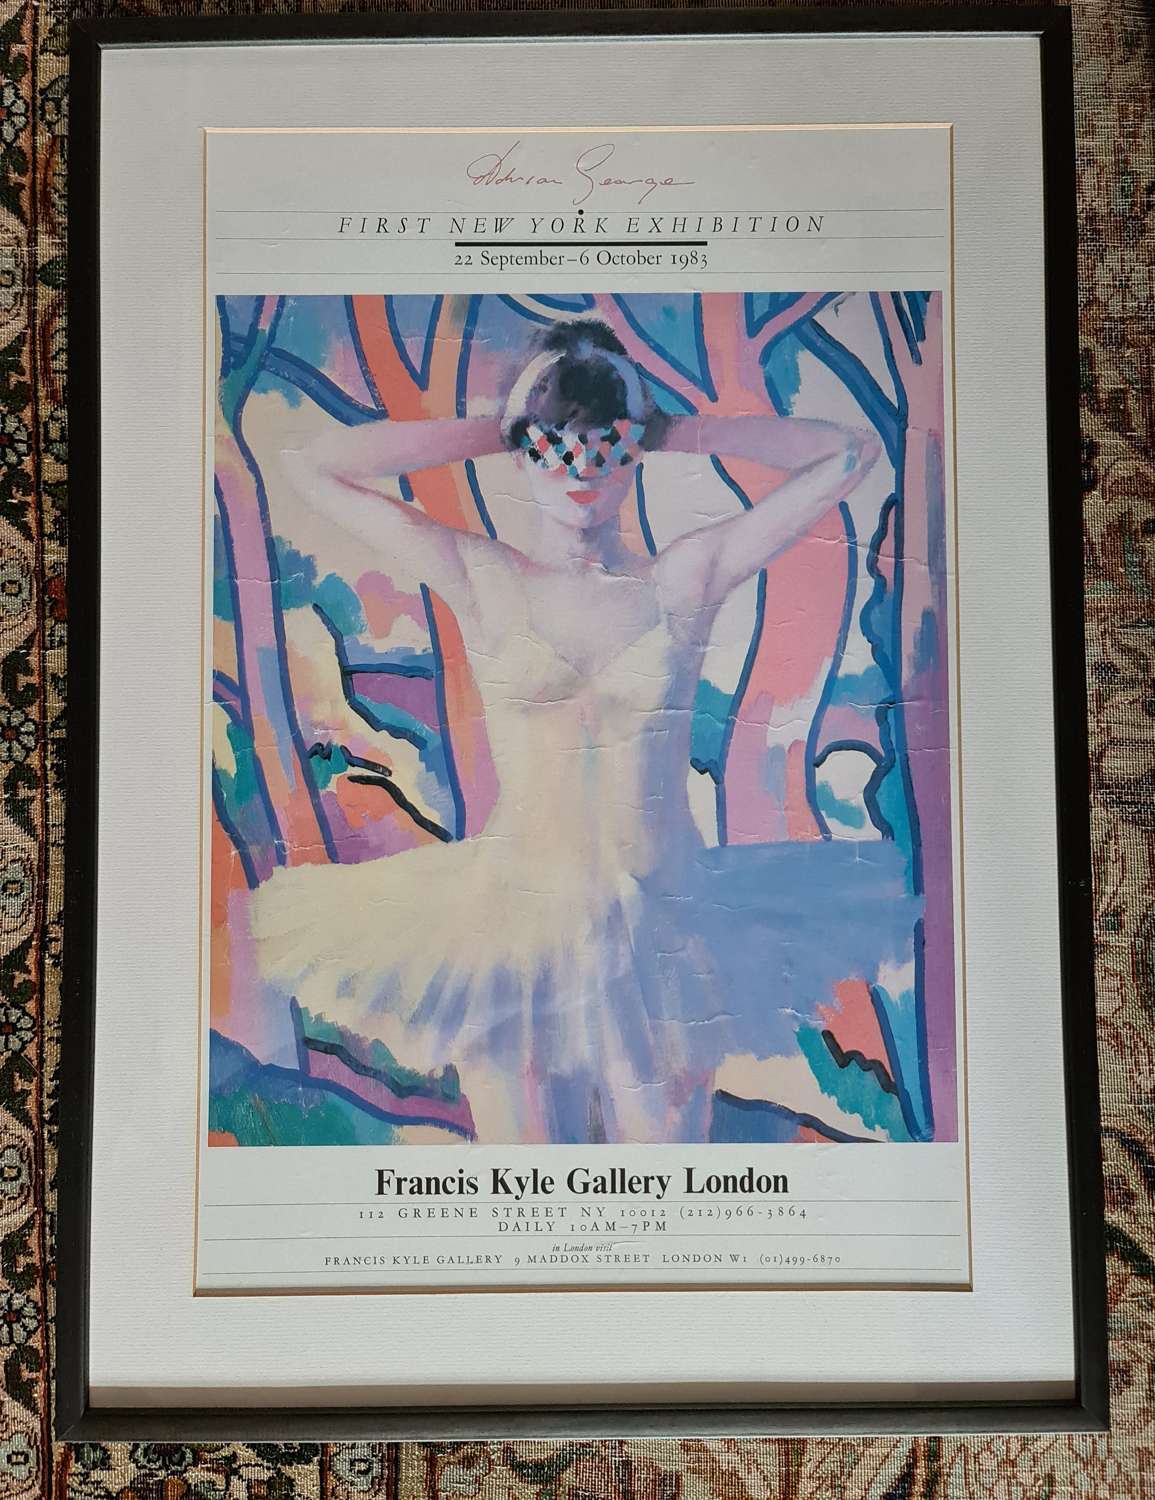 Original Poster for the First New York Exhibition of Adrian George